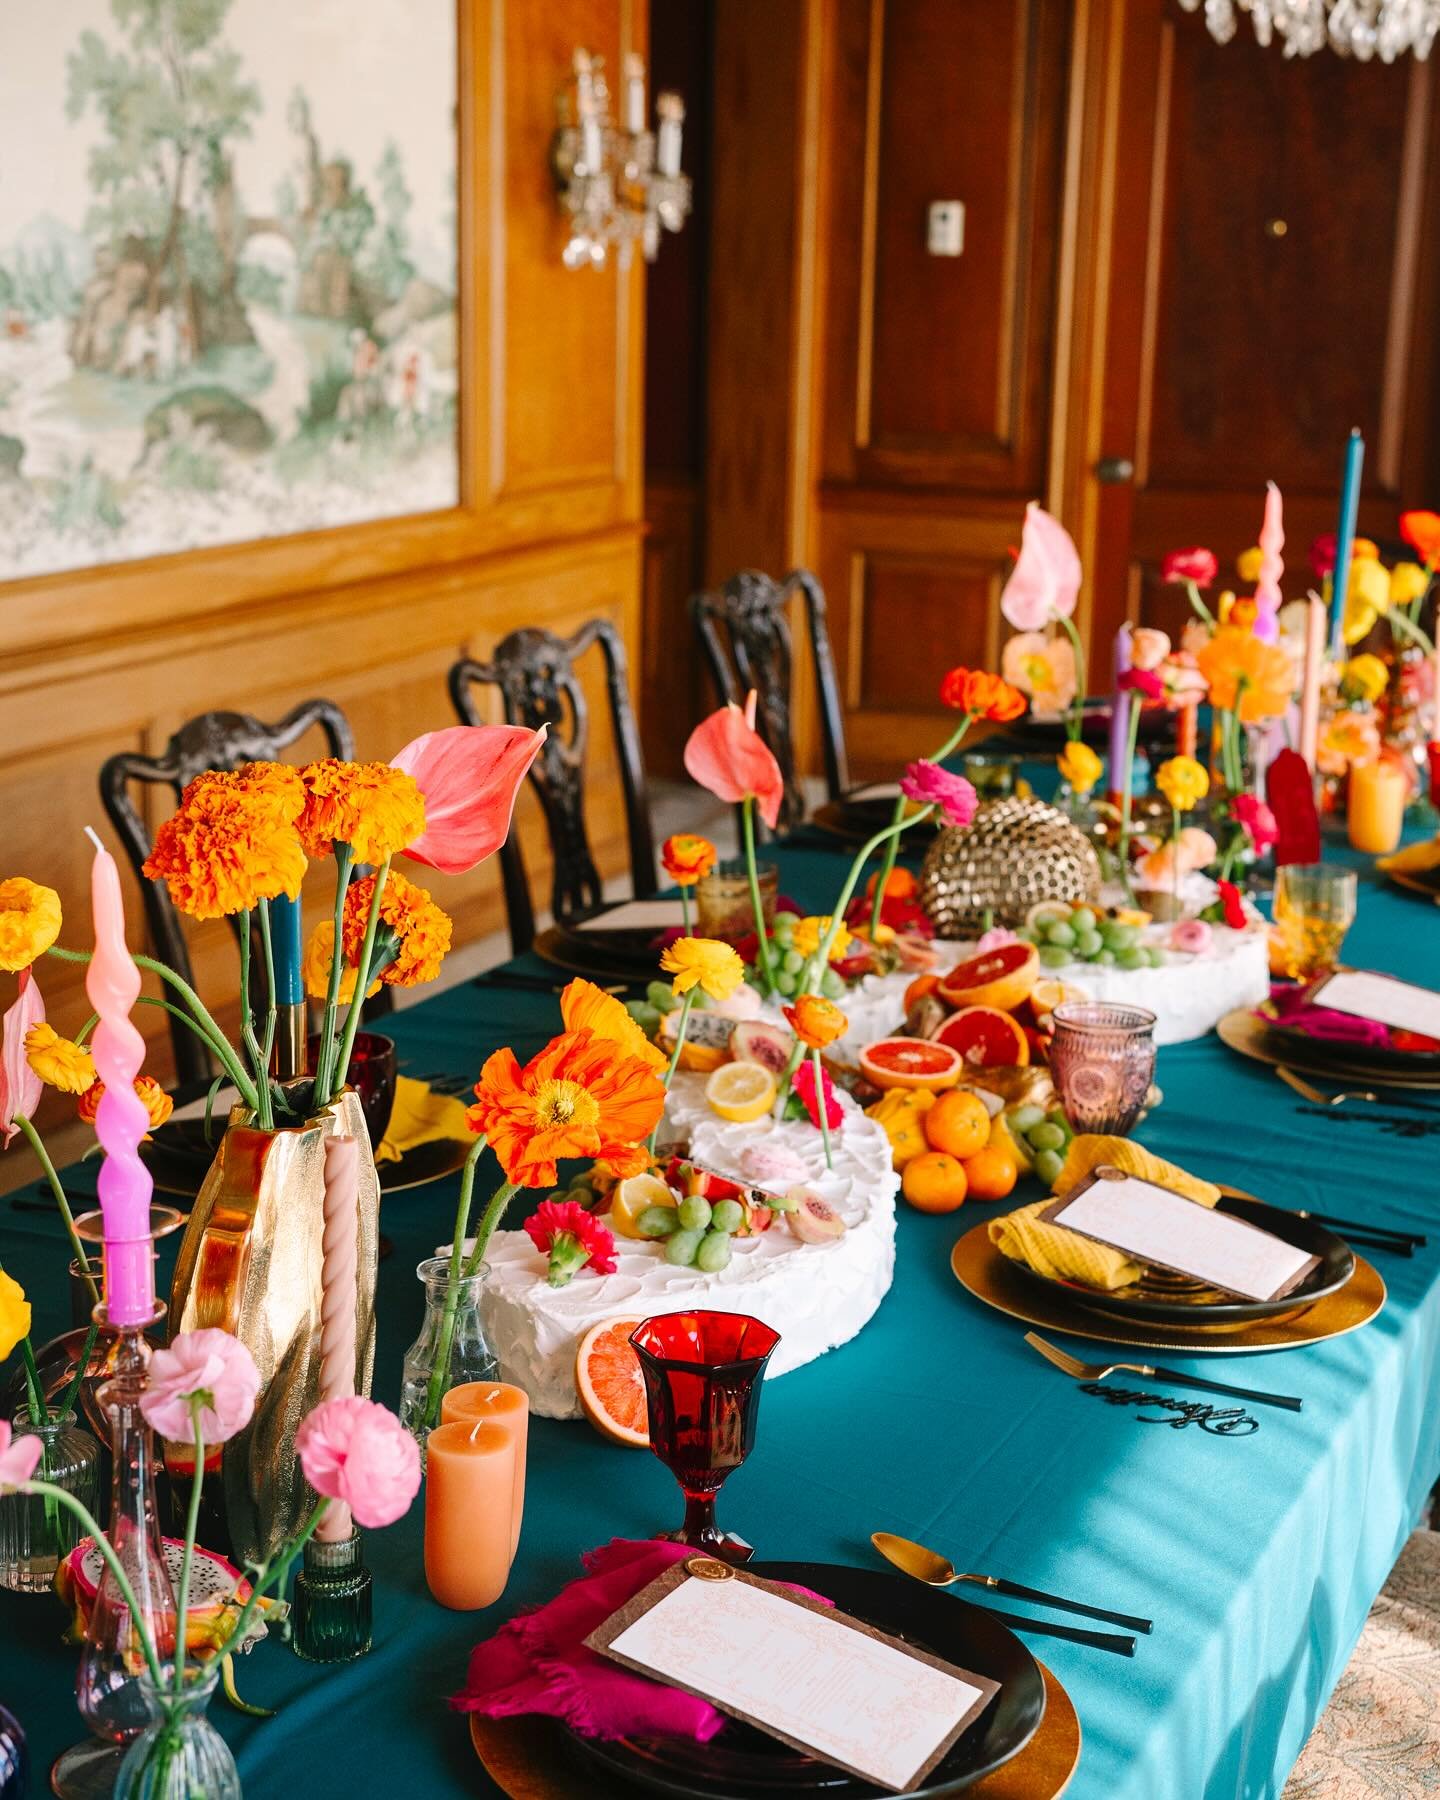 Colorful Maximalism

Yesterday we had an amazing time getting together to create an explosion of color at one of Arkansas most beautiful and extravagant wedding venues. What we wanted to highlight was how you could still have an upscale luxury event 